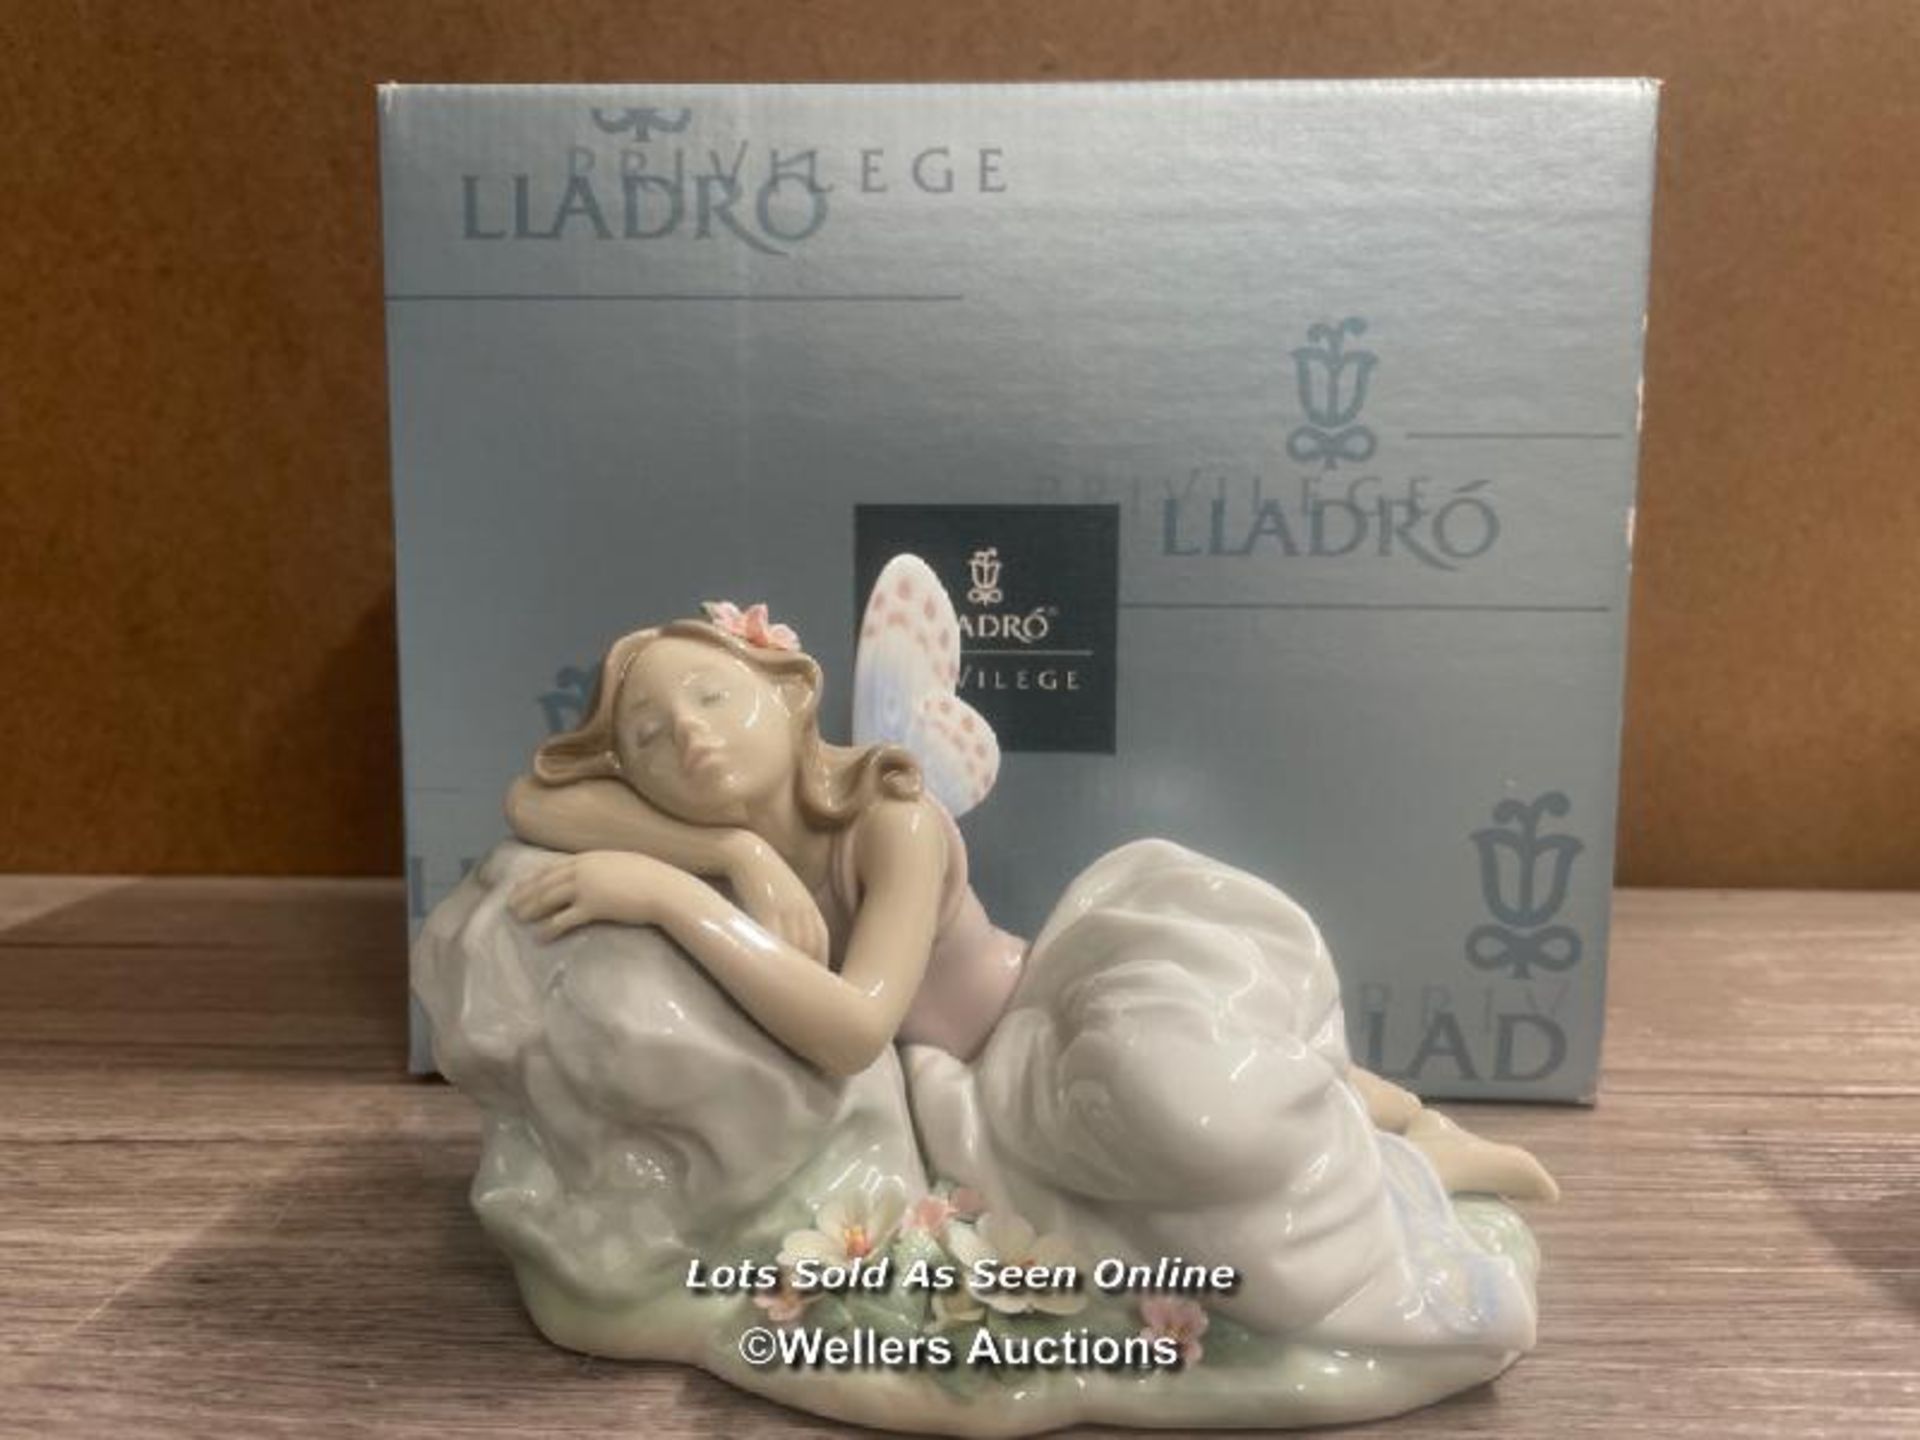 LLADRO PRIVILEGE COLLECTION "PRINCESS OF THE FAIRIES" NO. 010.07694, BOXED